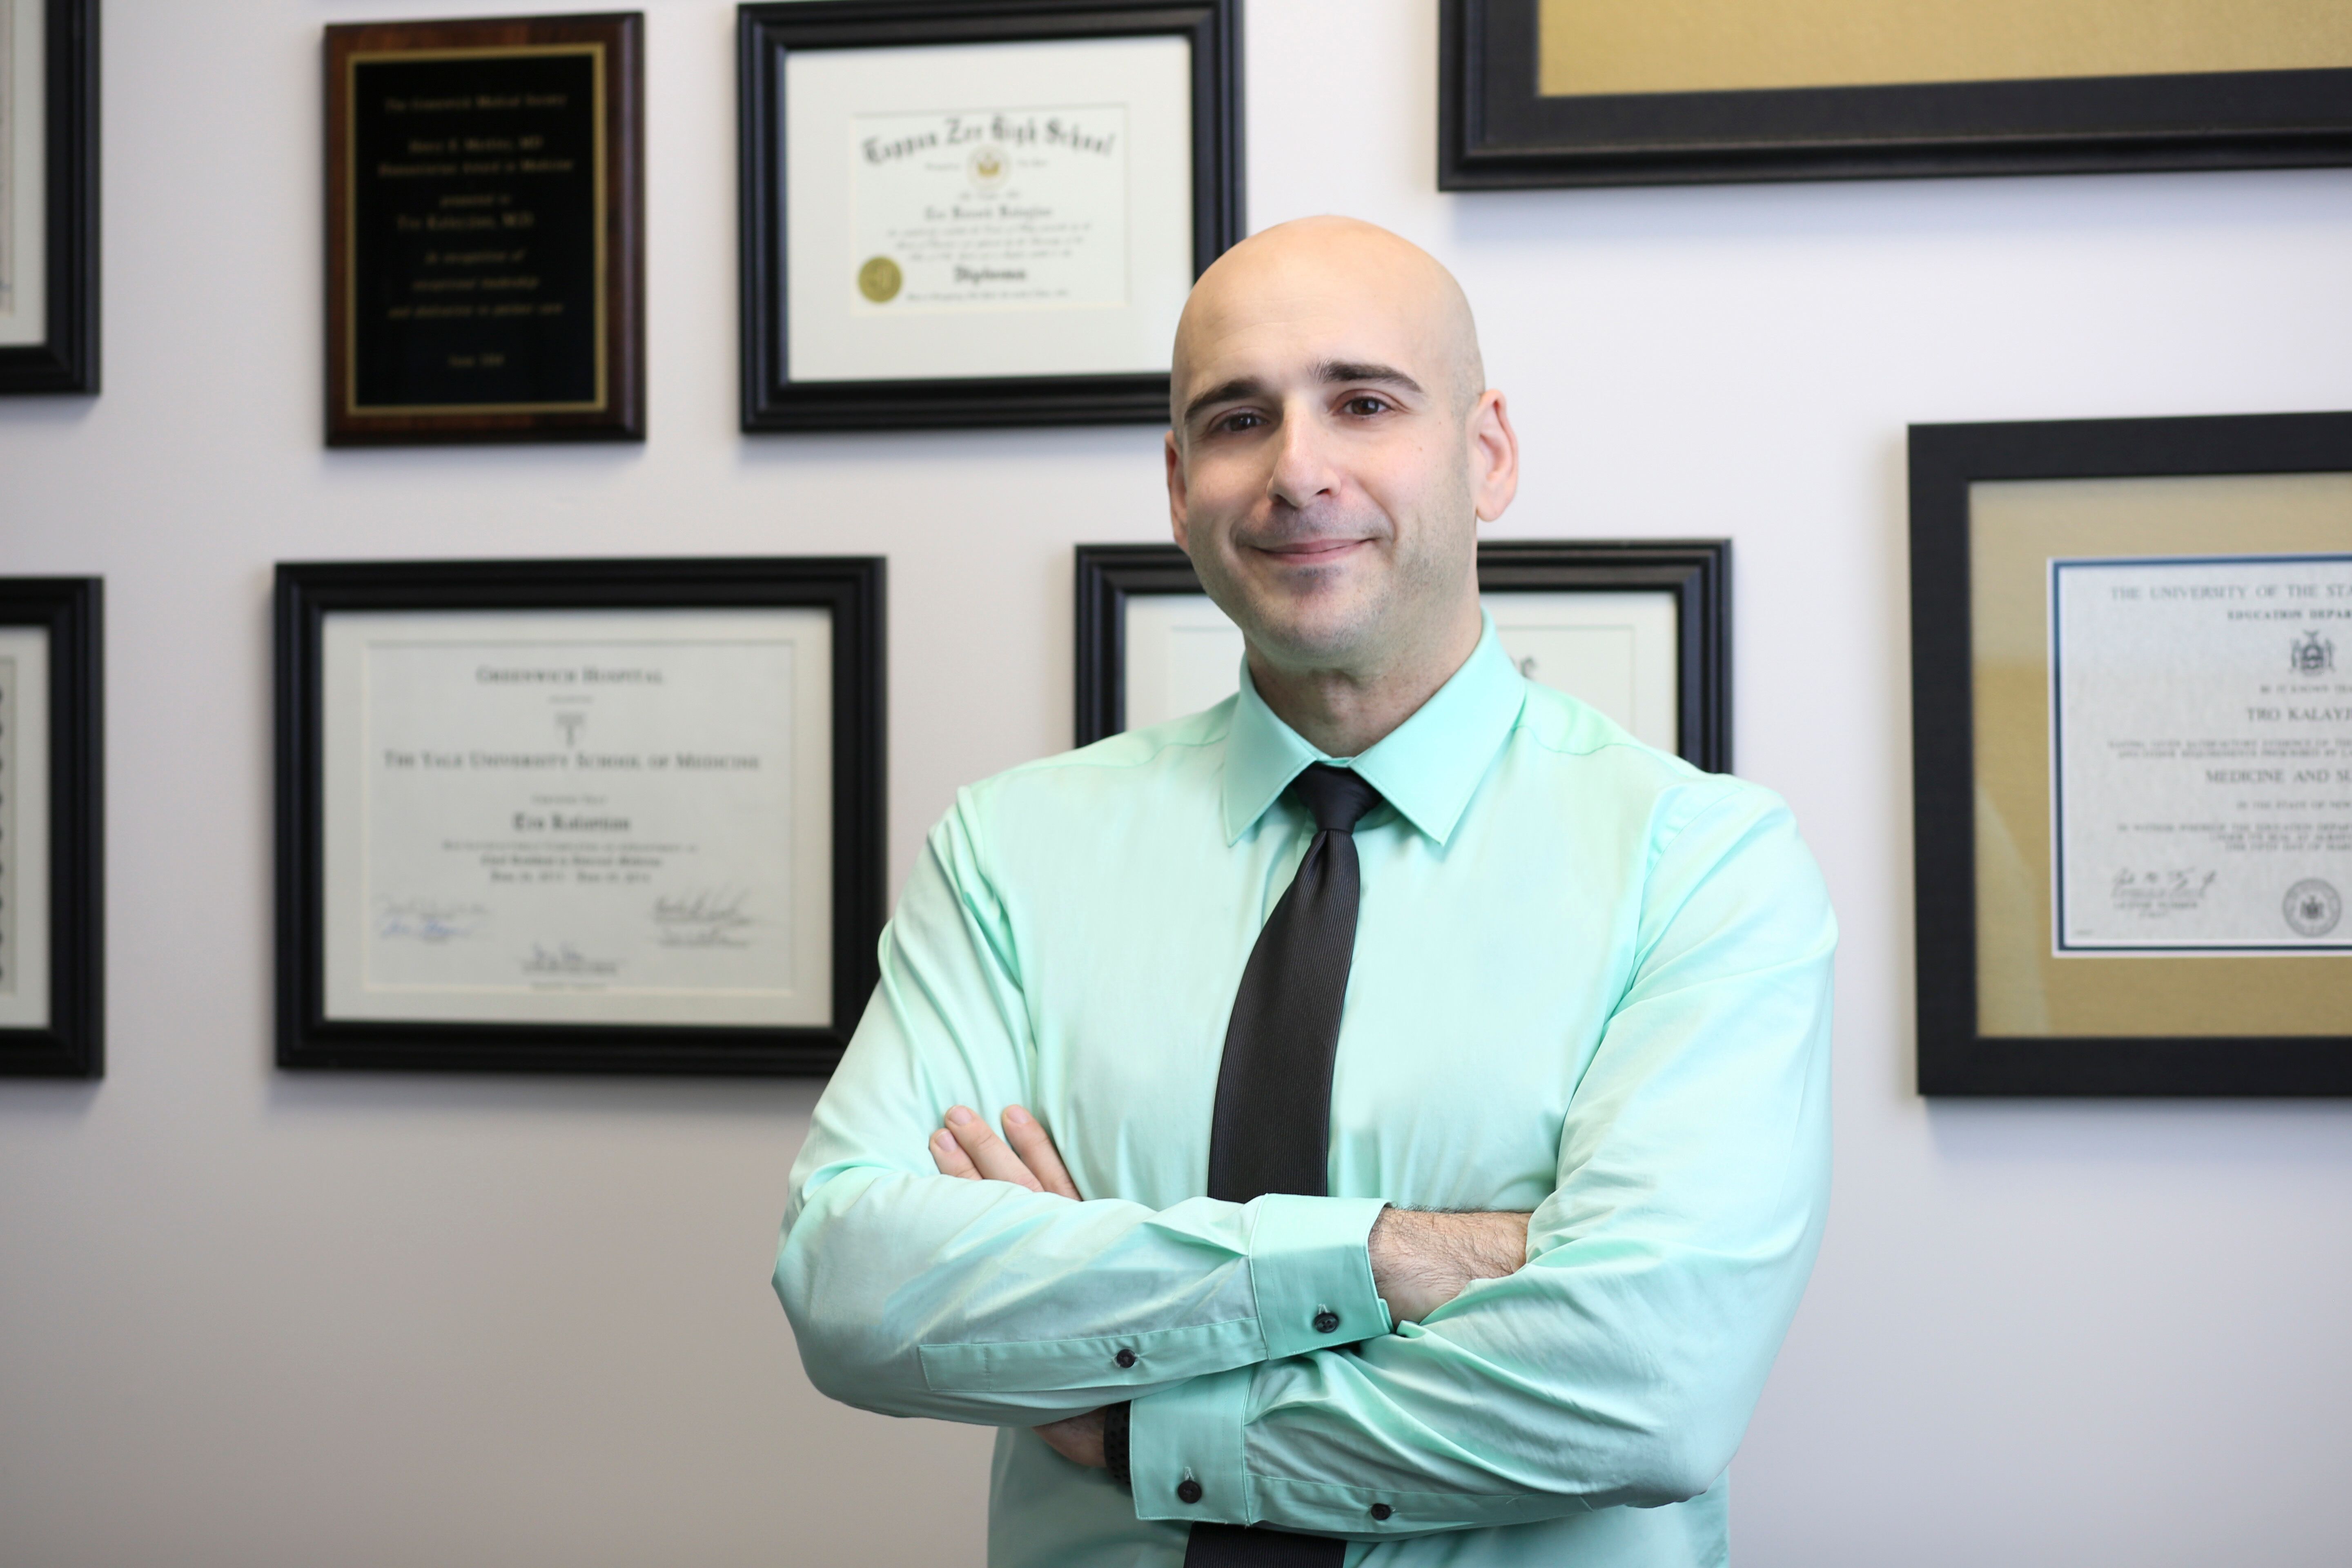 Dr. Tro Kalayjian has added group coaching to the list of services offered by his practice, located in Tappan, NY.